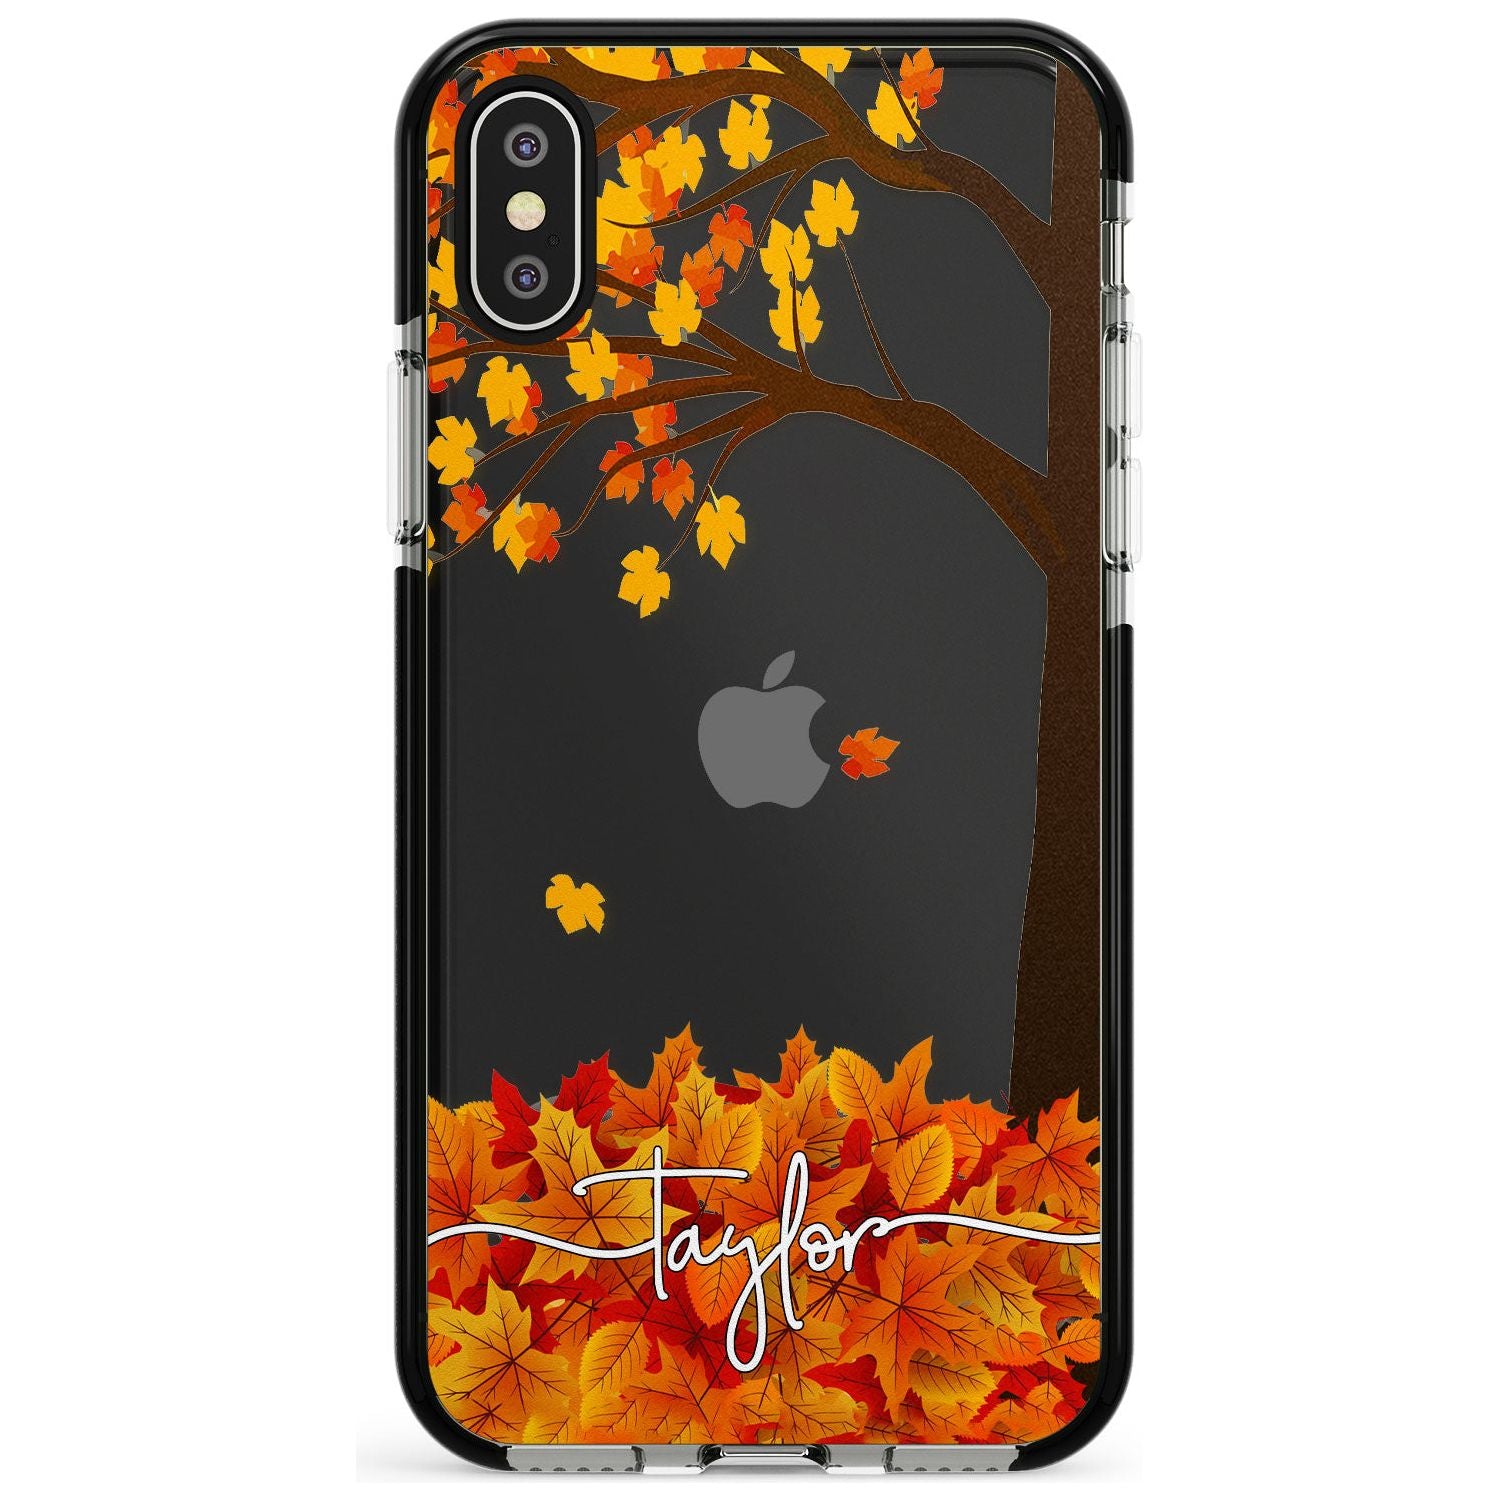 Personalised Autumn Leaves Black Impact Phone Case for iPhone X XS Max XR